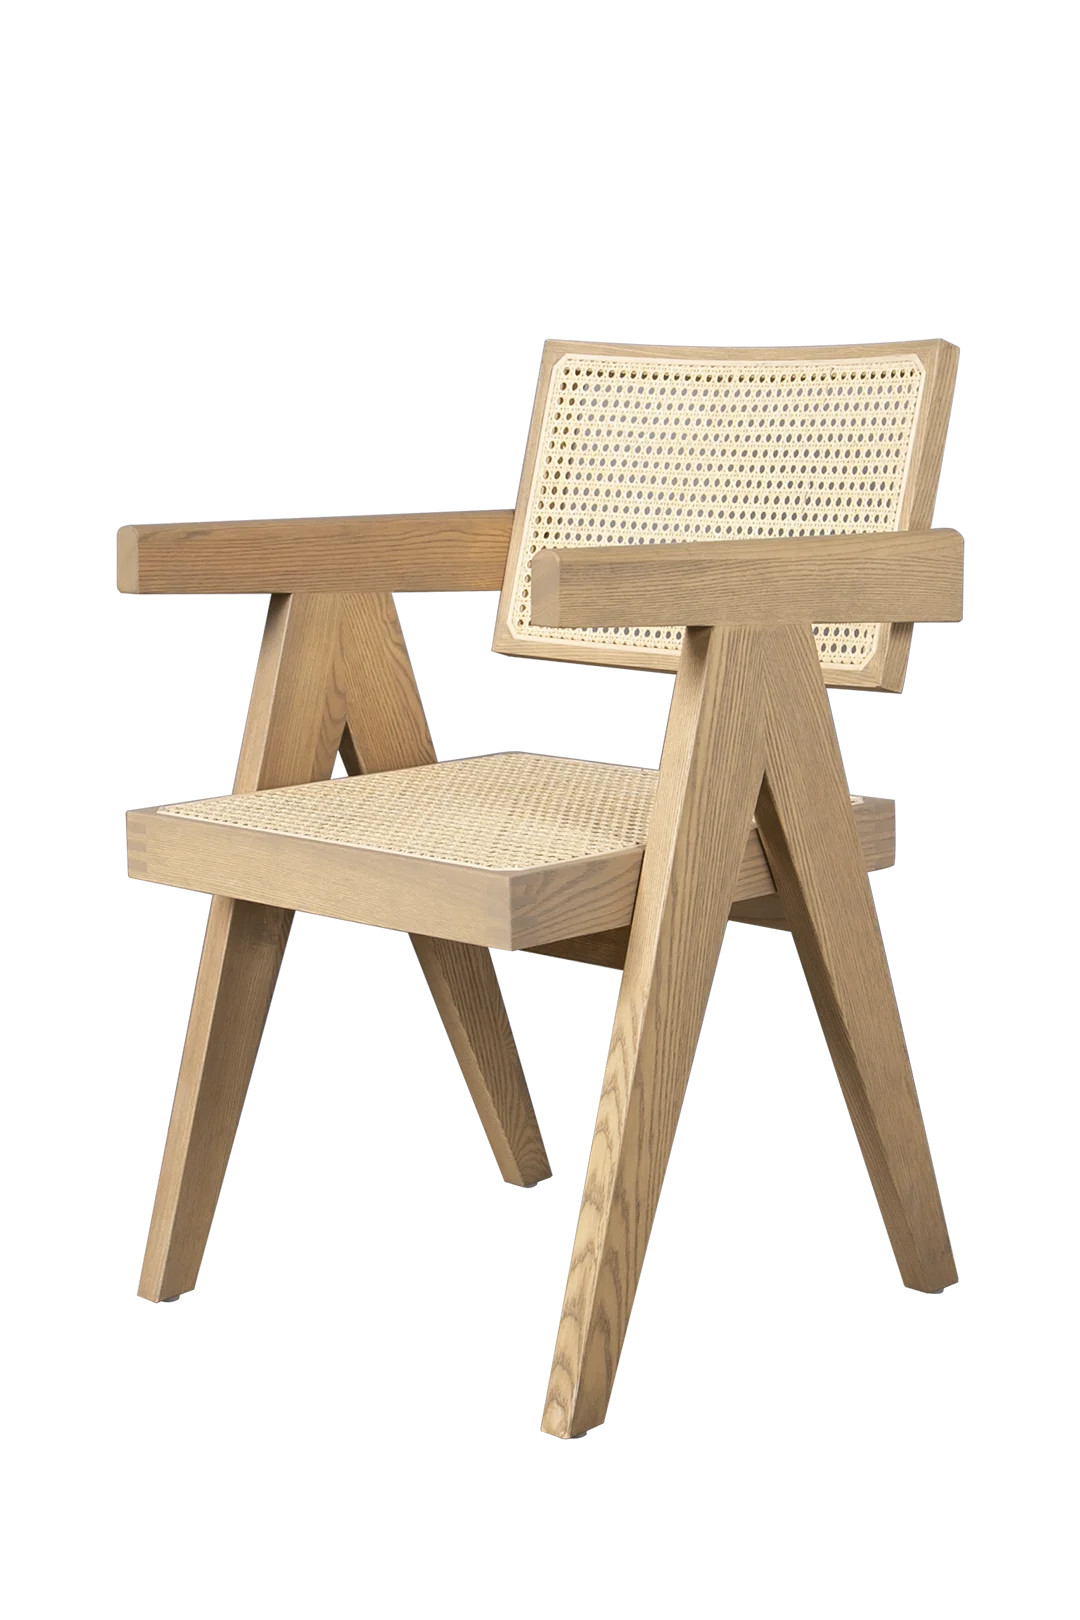 Rattan Solid Wooden Chair for Home Restaurant Hotel Furniture